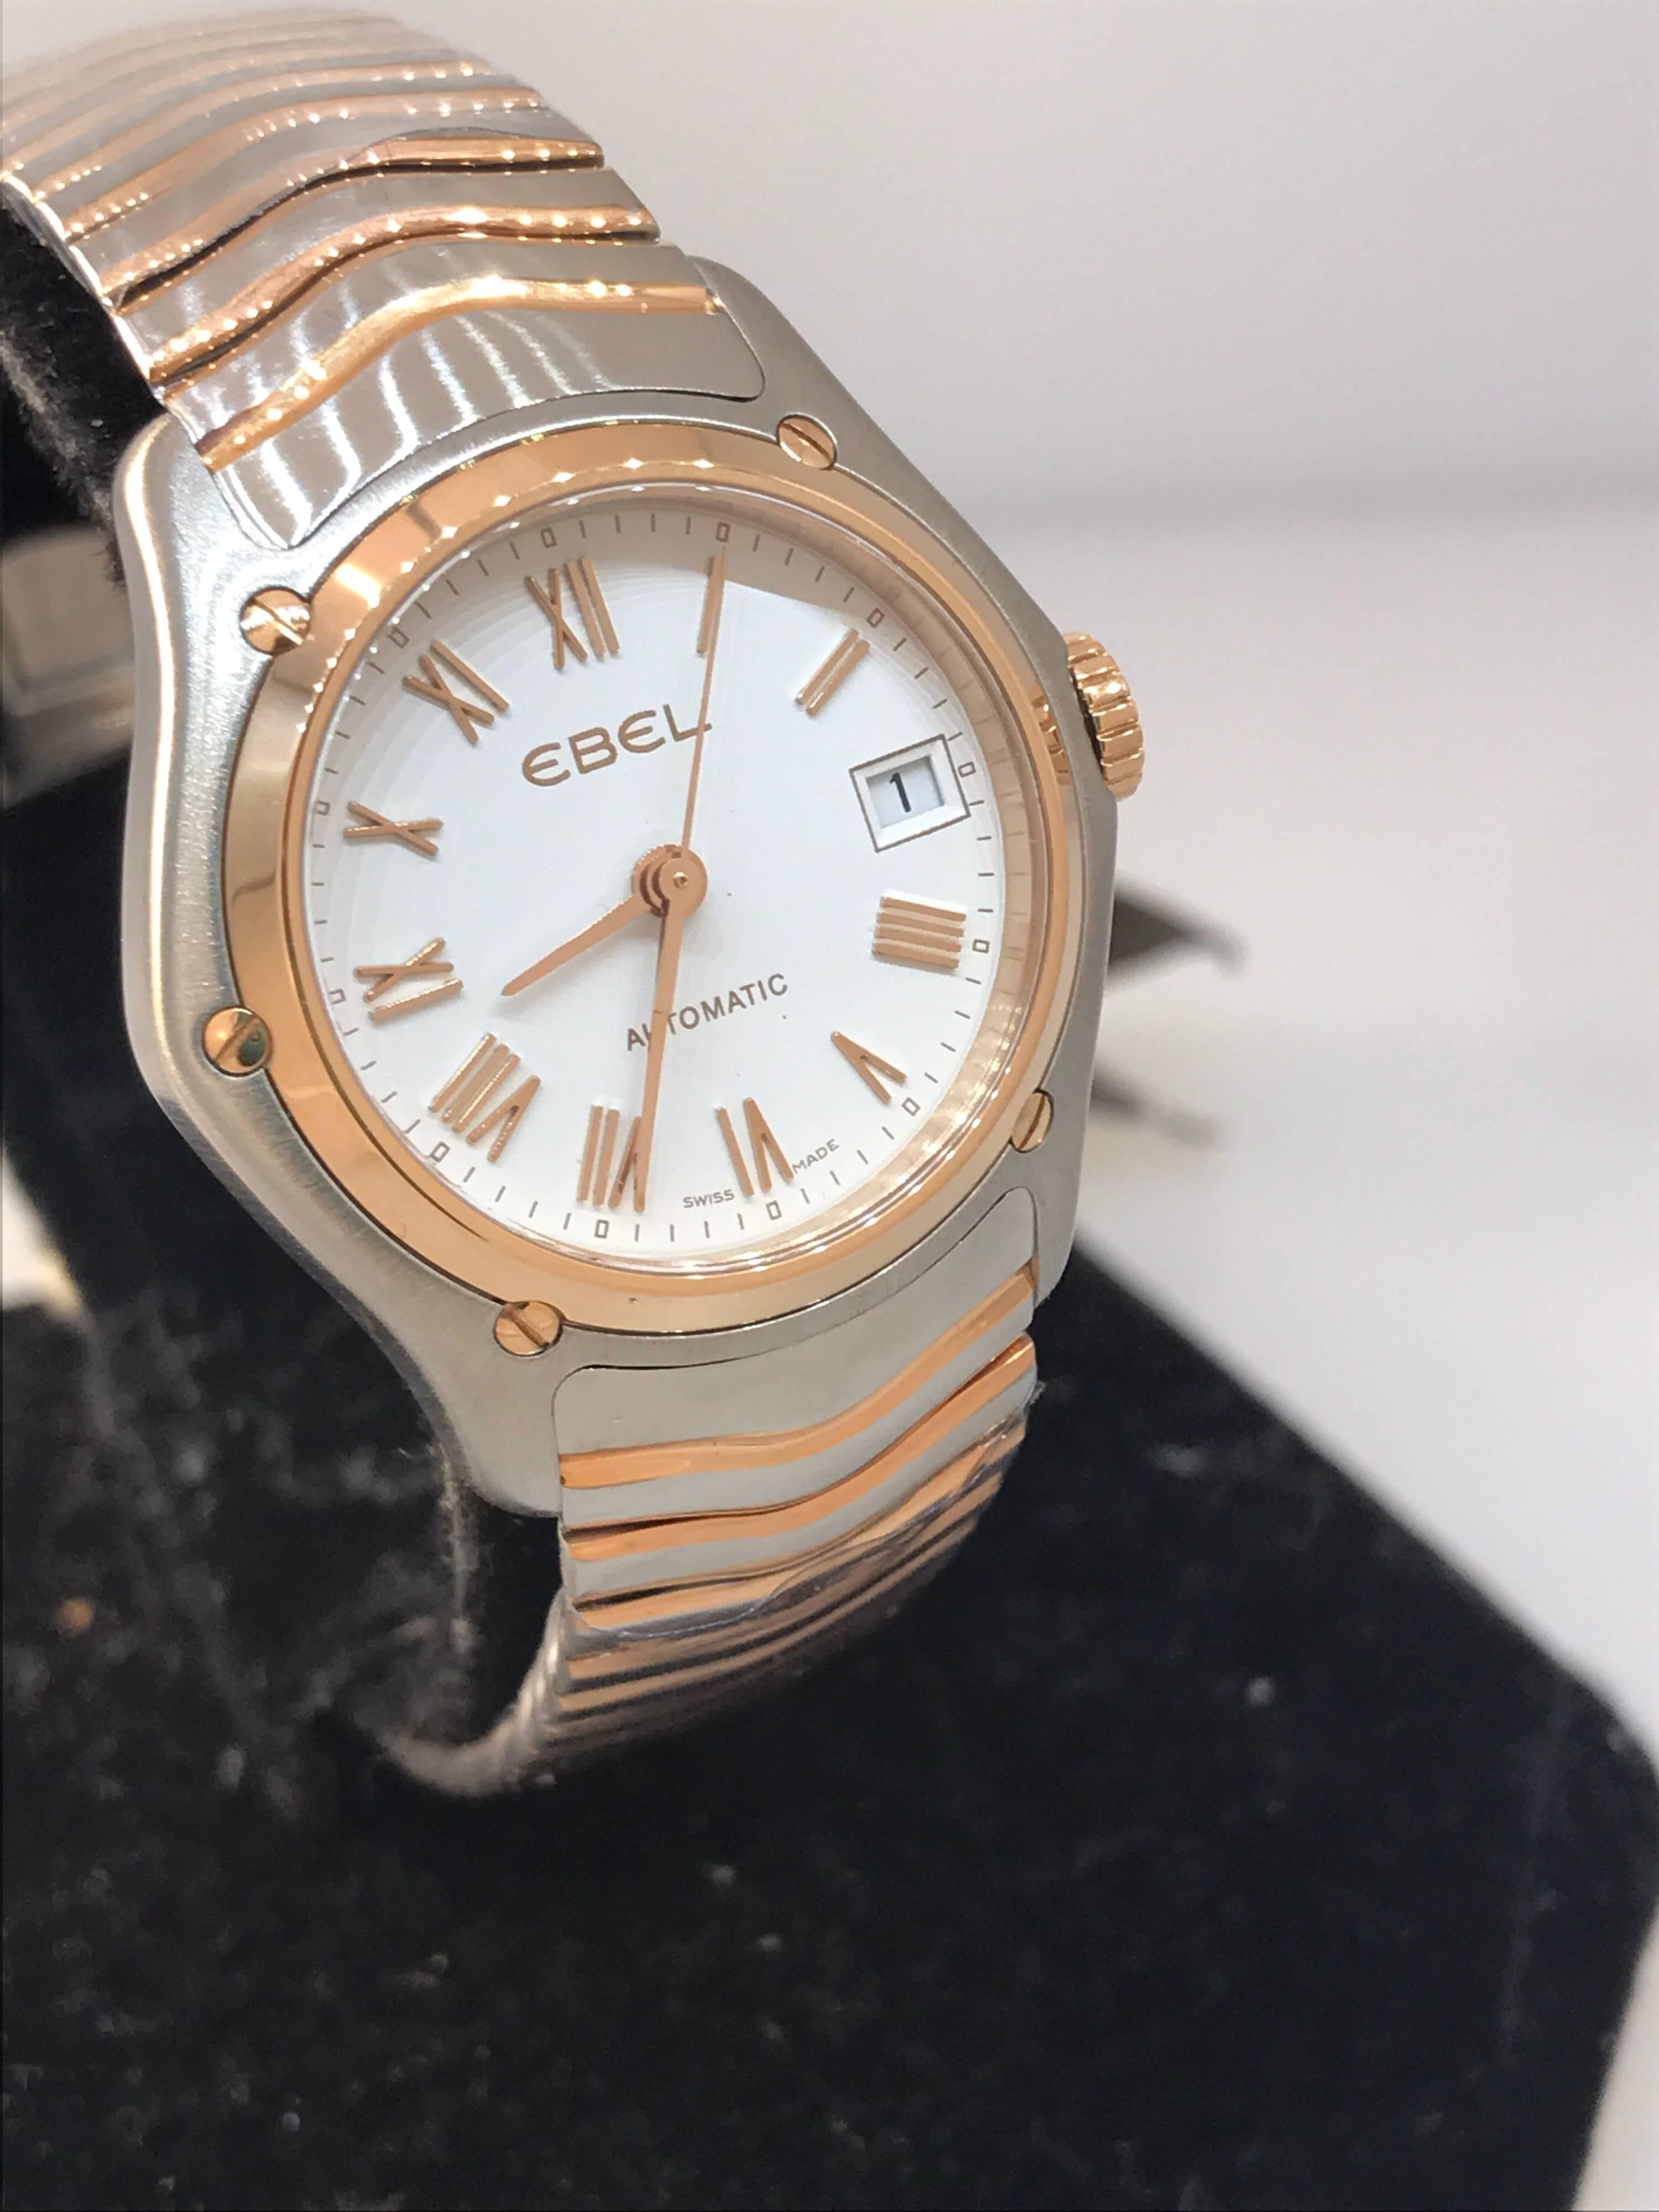 Ebel Classic Wave Ladies Watch

Model Number: 1215926

100% Authentic

Brand New

Comes with original Ebel box, warranty card and instruction manual

18K Yellow Gold & Stainless Steel Case & Bracelet

Case Size: 30mm

Water Resistant up to